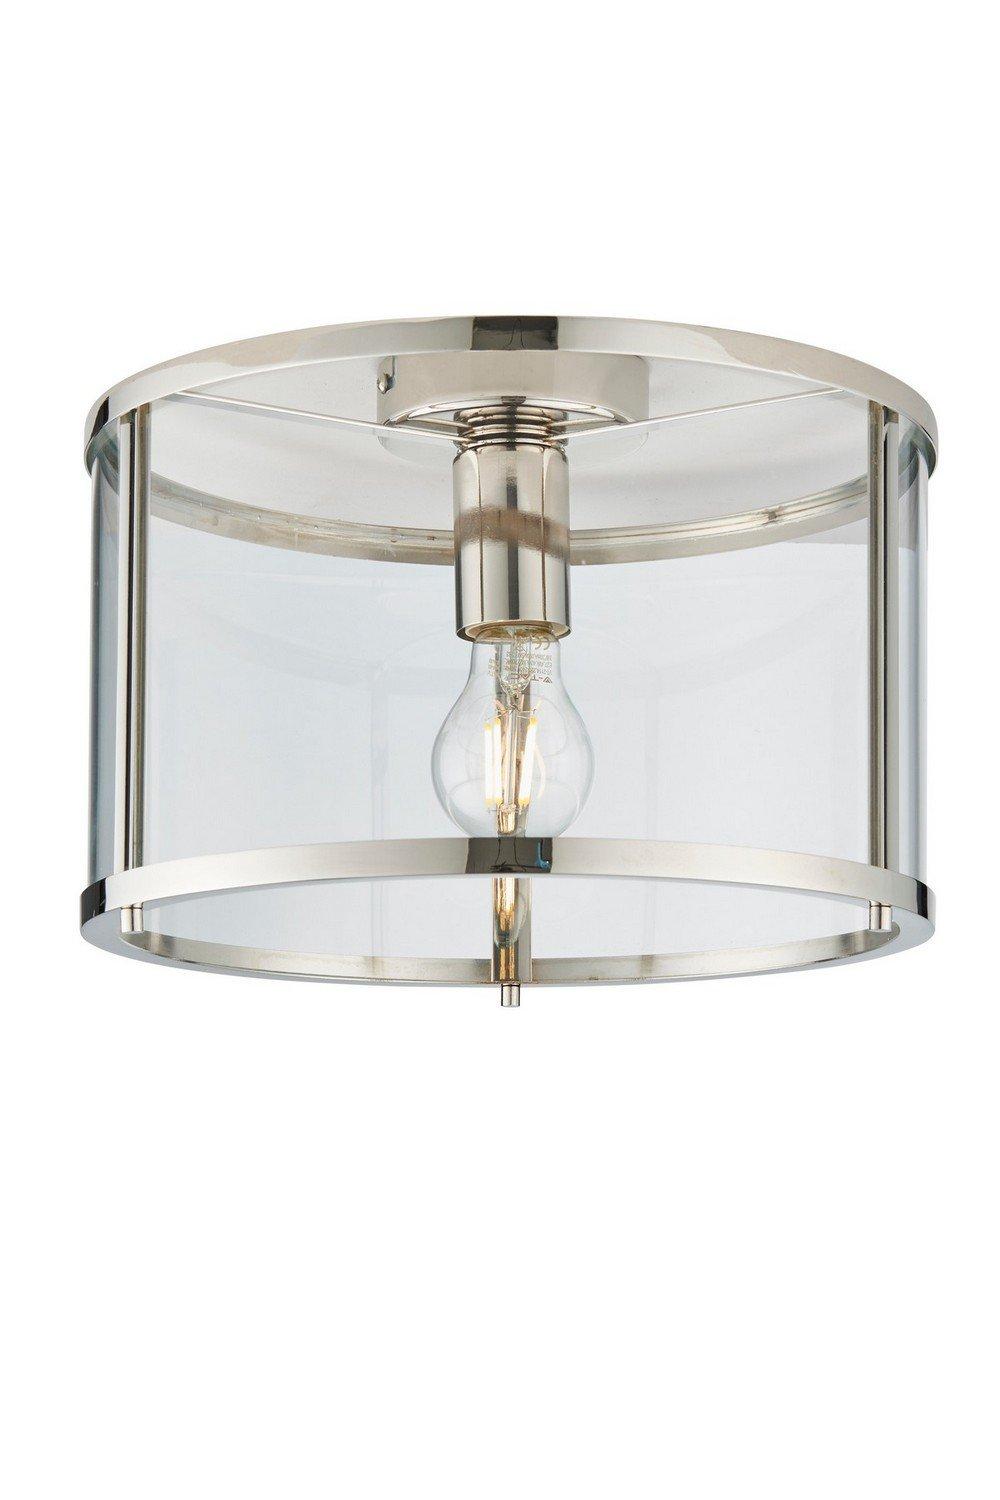 Hopton Cylindrical Ceiling Light Bright Nickel Clear Glass Shade